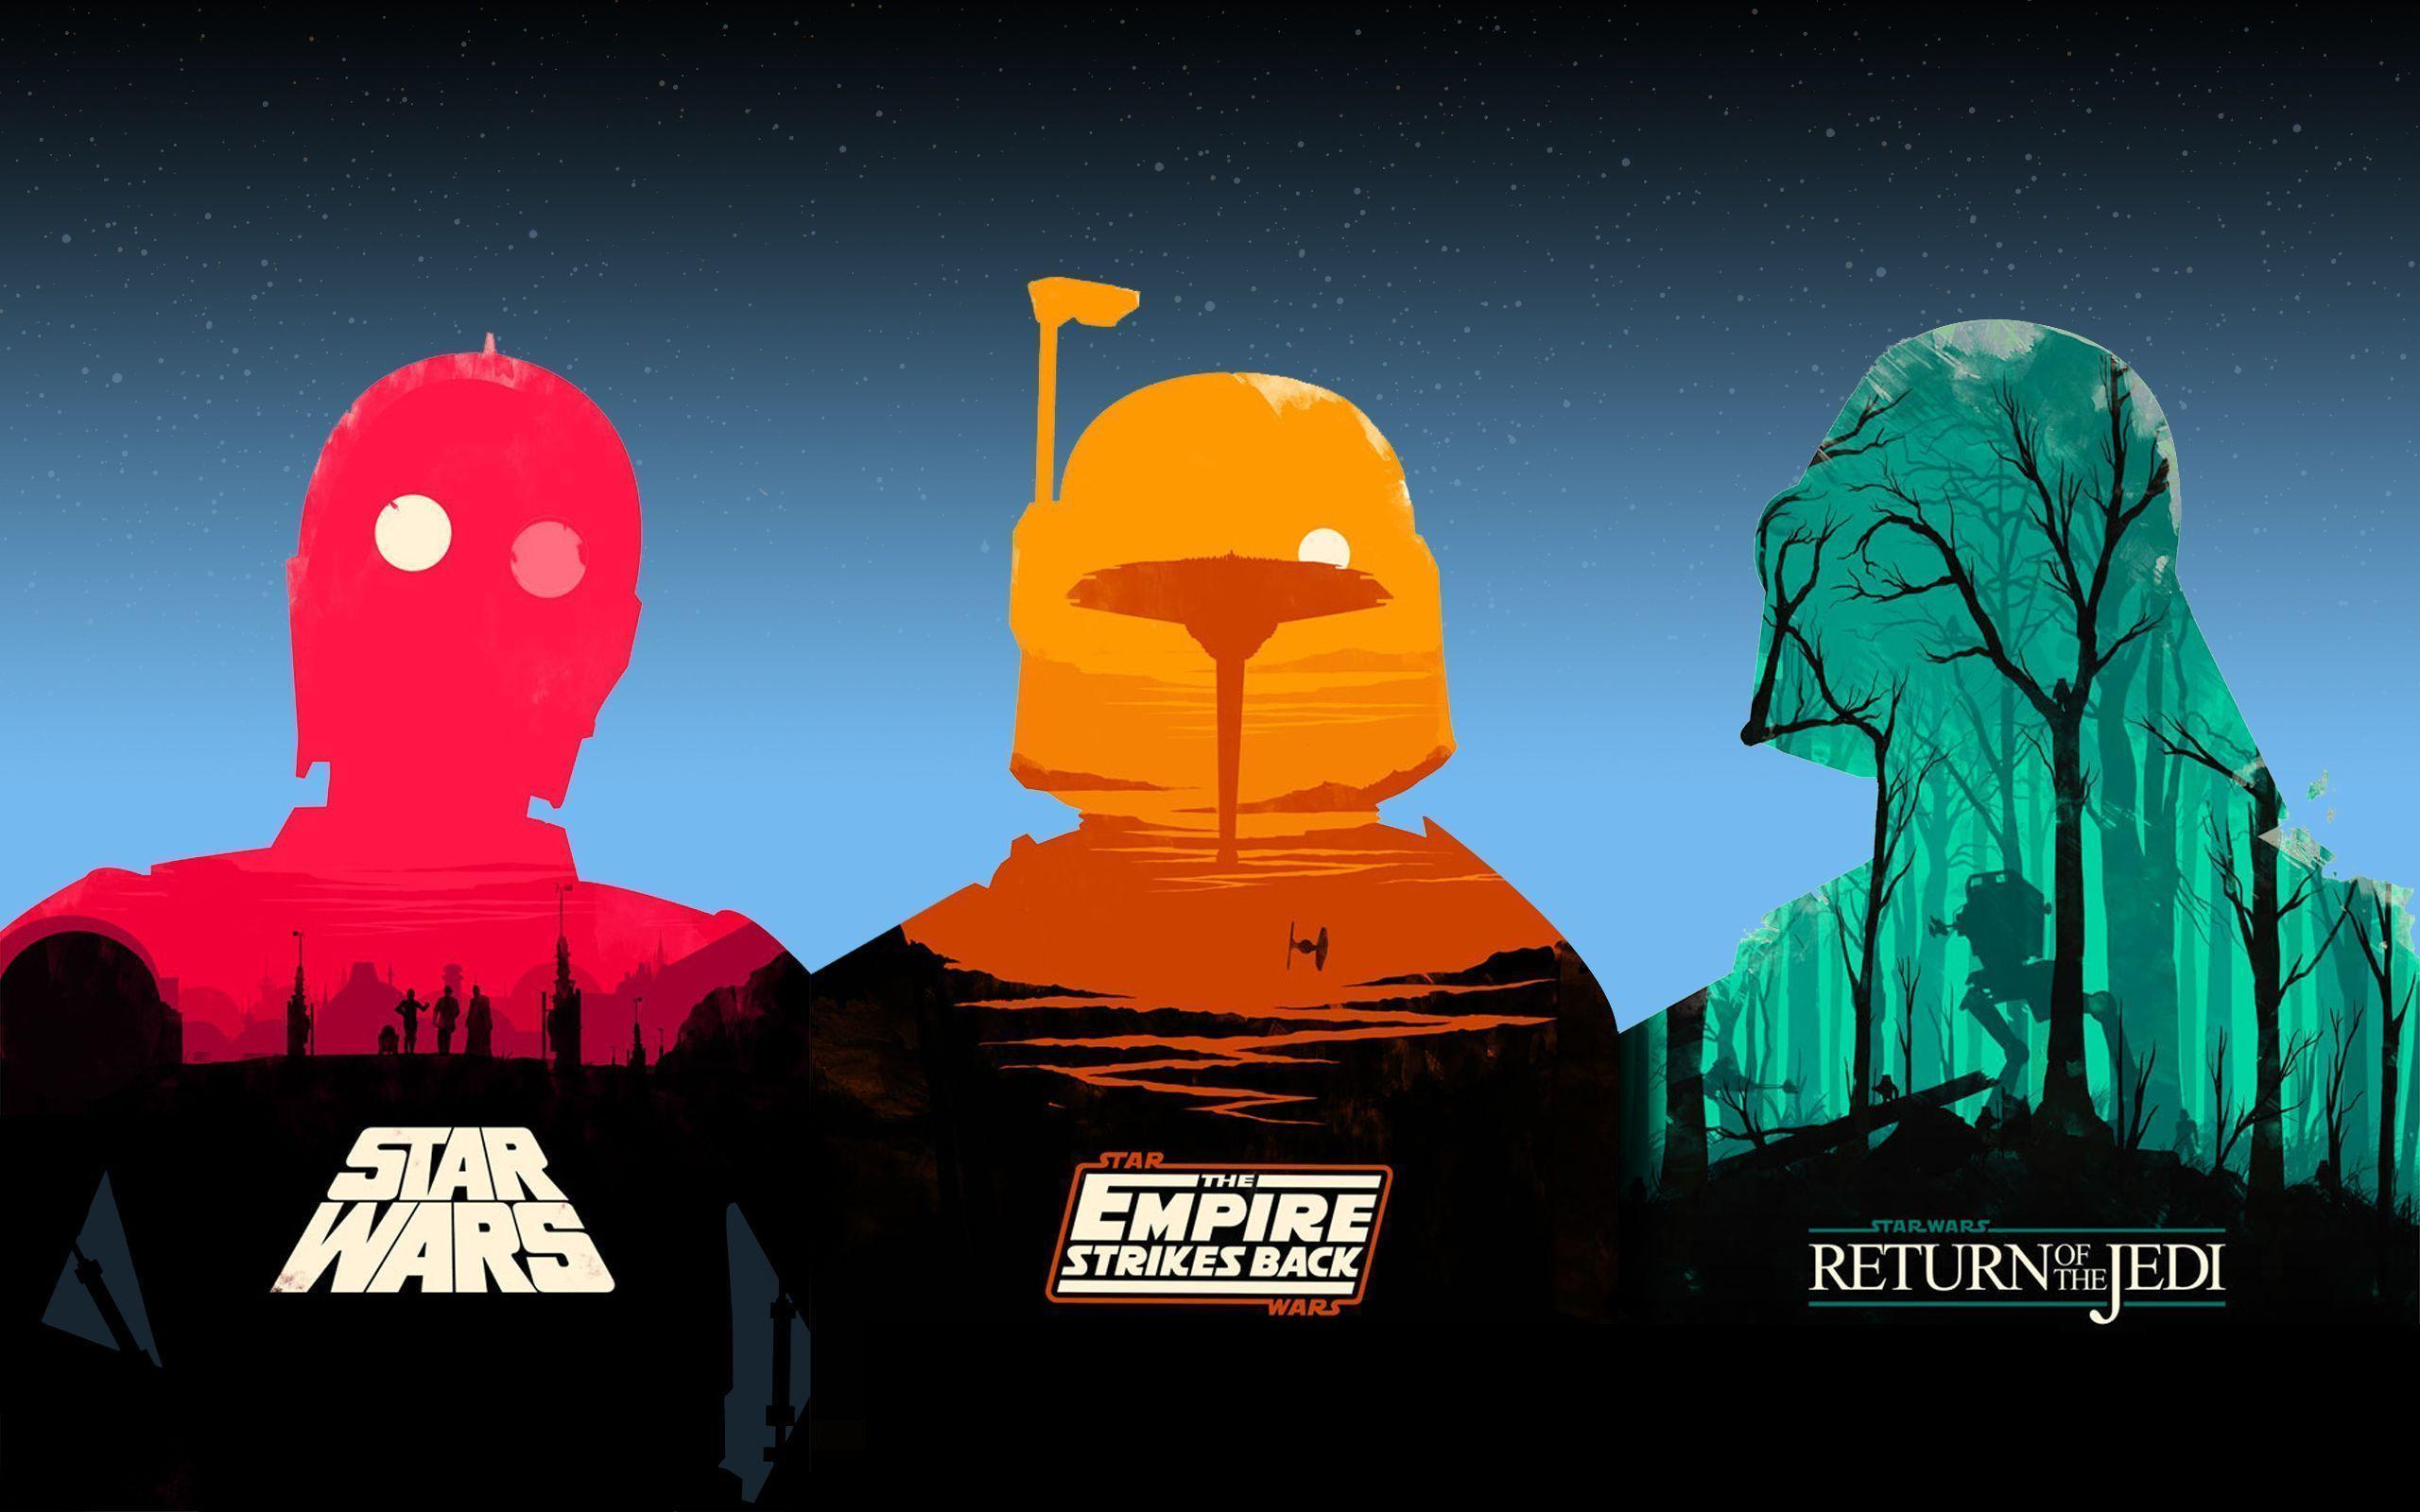 I&;ve compiled Olly Moss&; Star Wars posters into one epic wallpaper